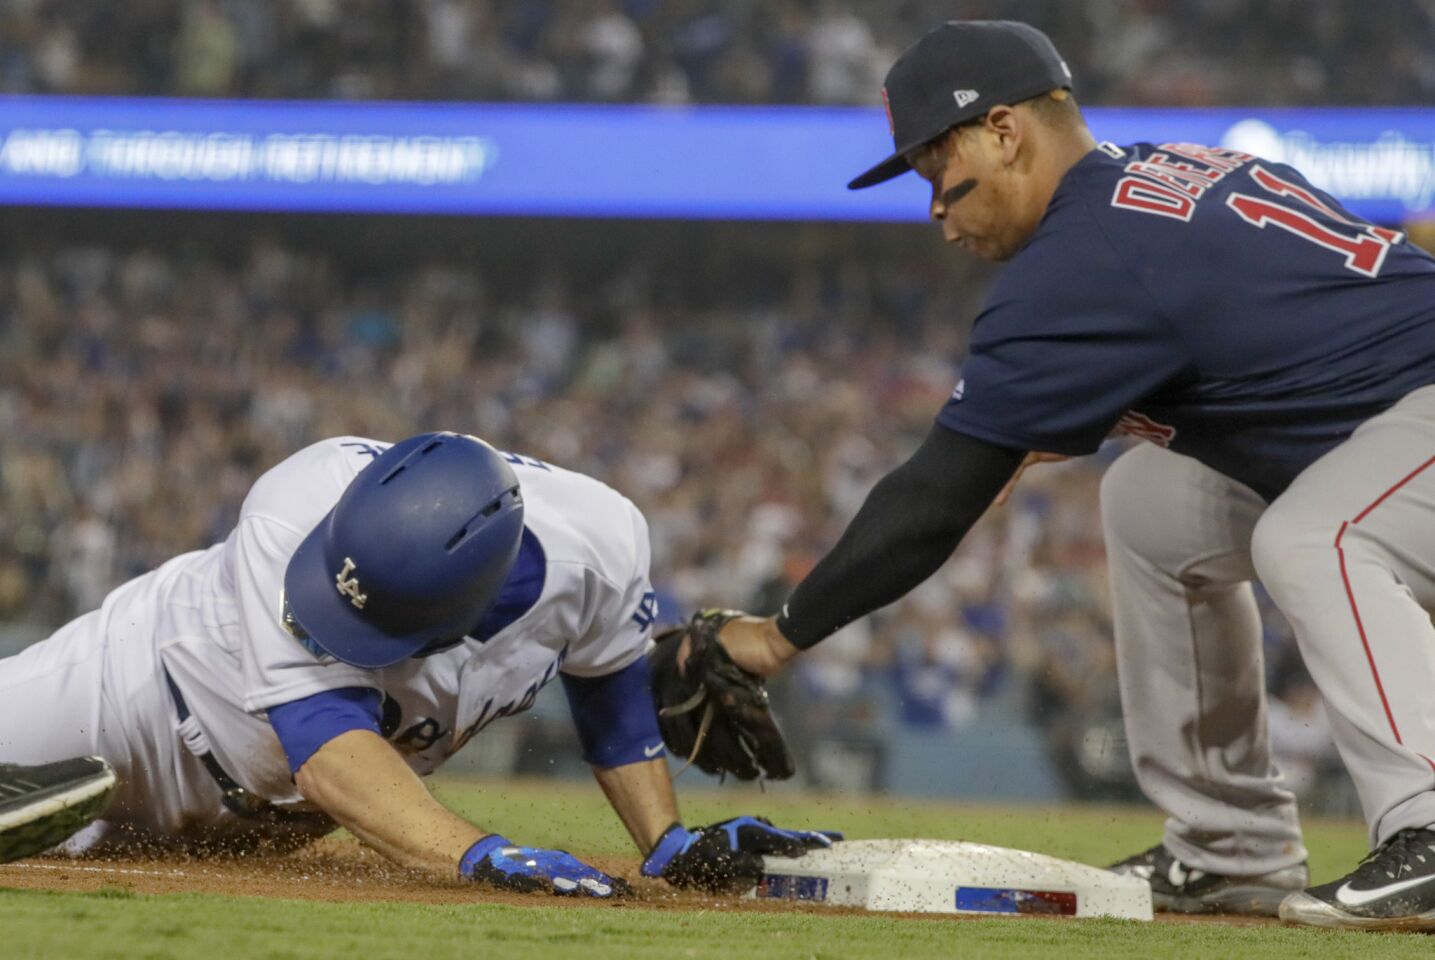 Dodgers David Freese slides into third with a third inning triple as Red Sox's Rafael Devers makes a late tag.